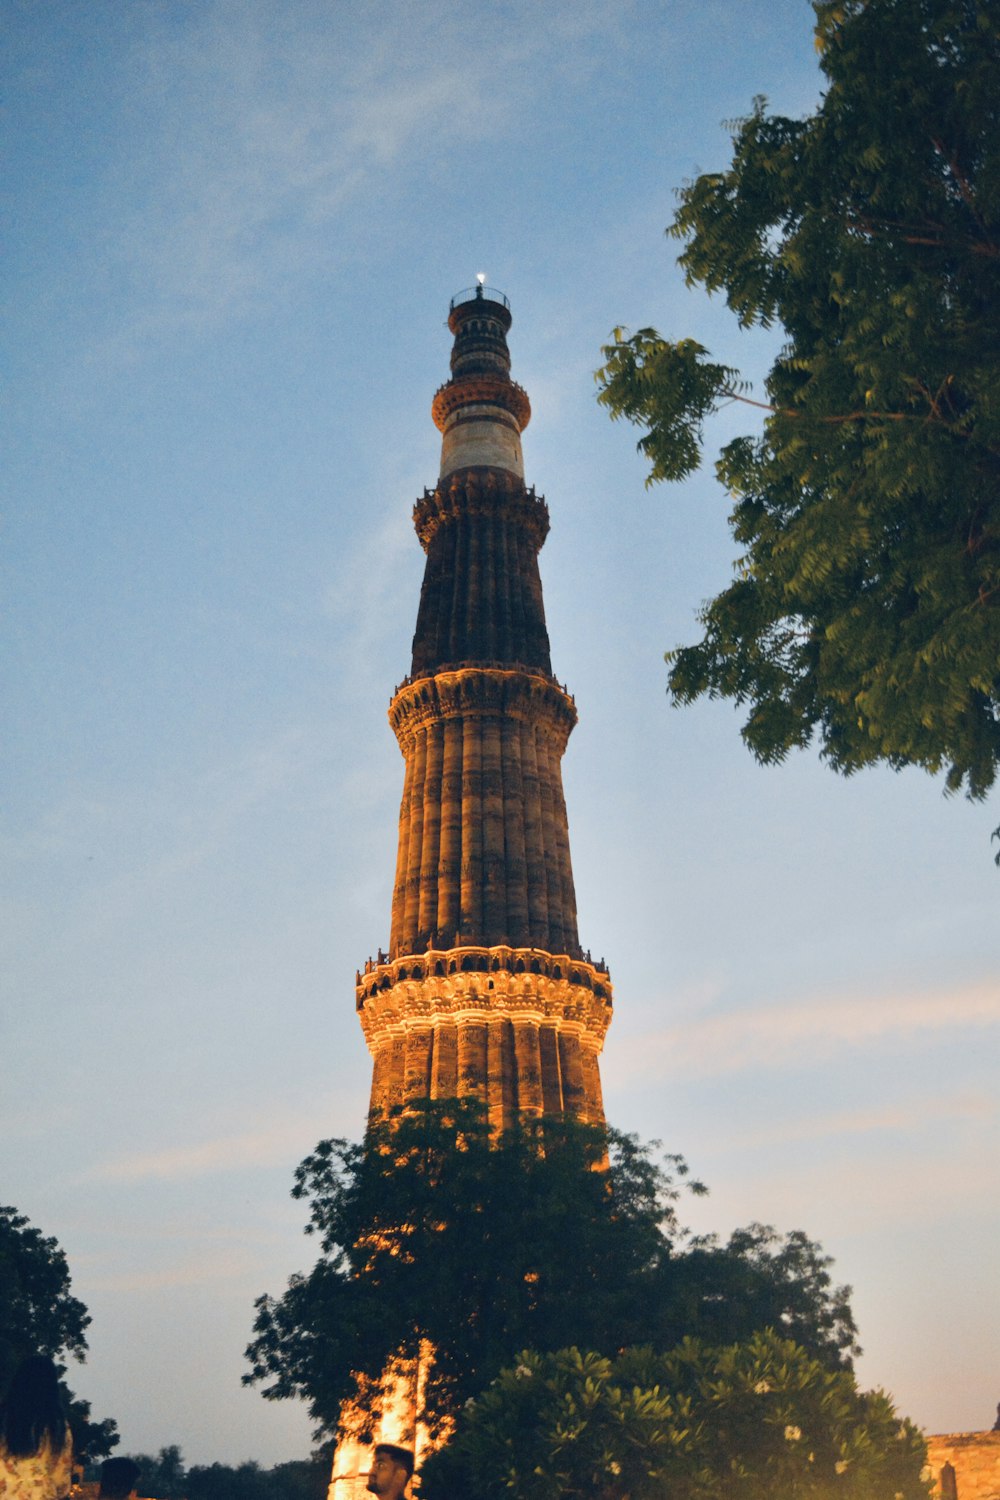 a tall tower with lights at night with Qutub Minar in the background